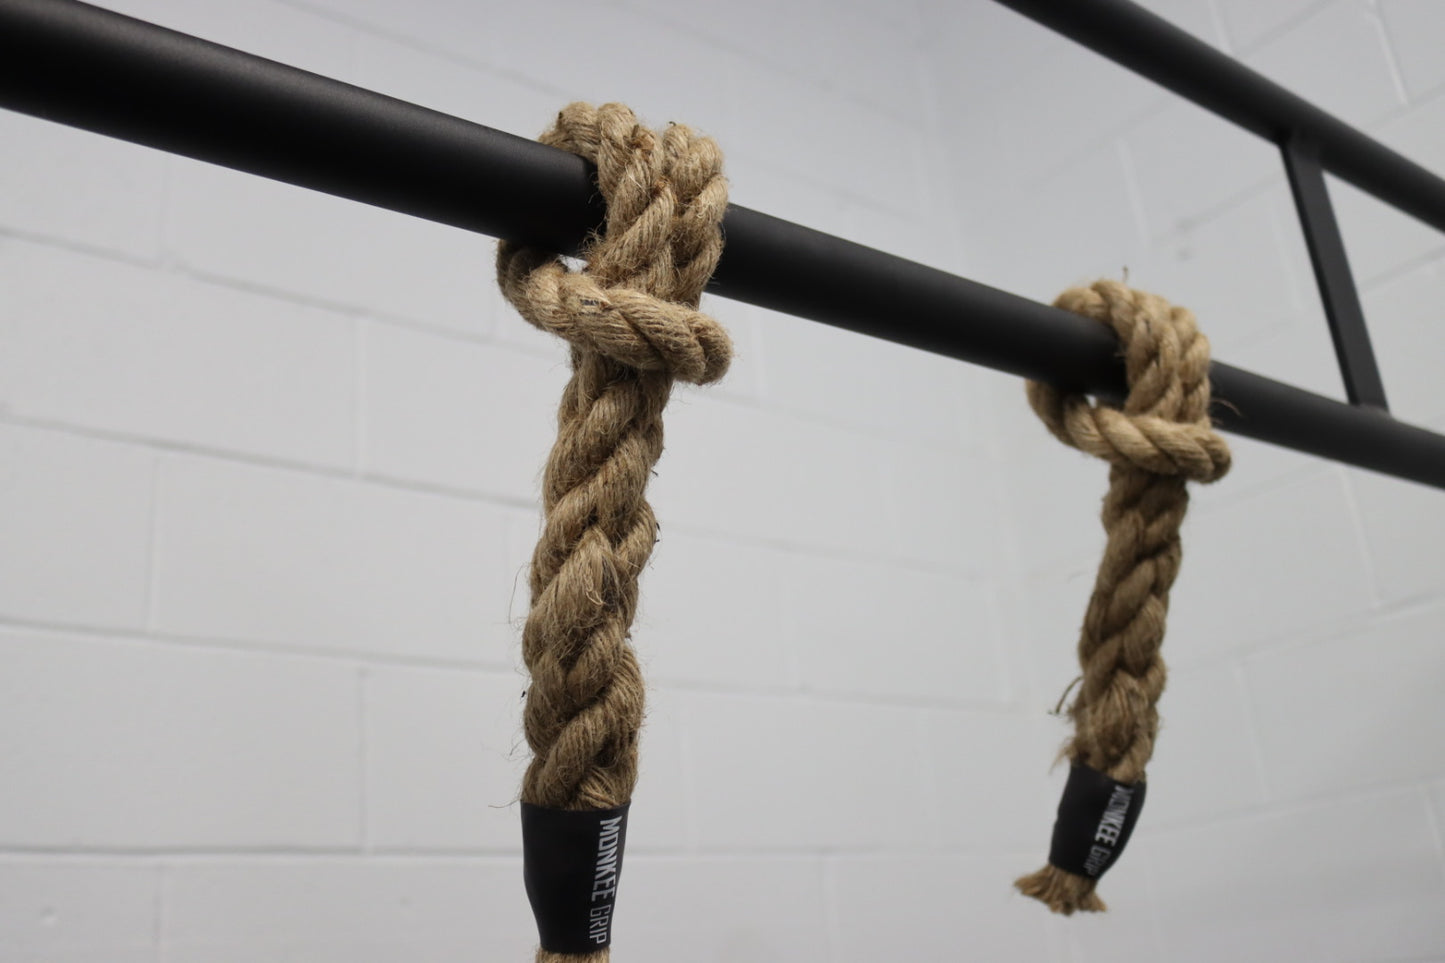 Rope Grips